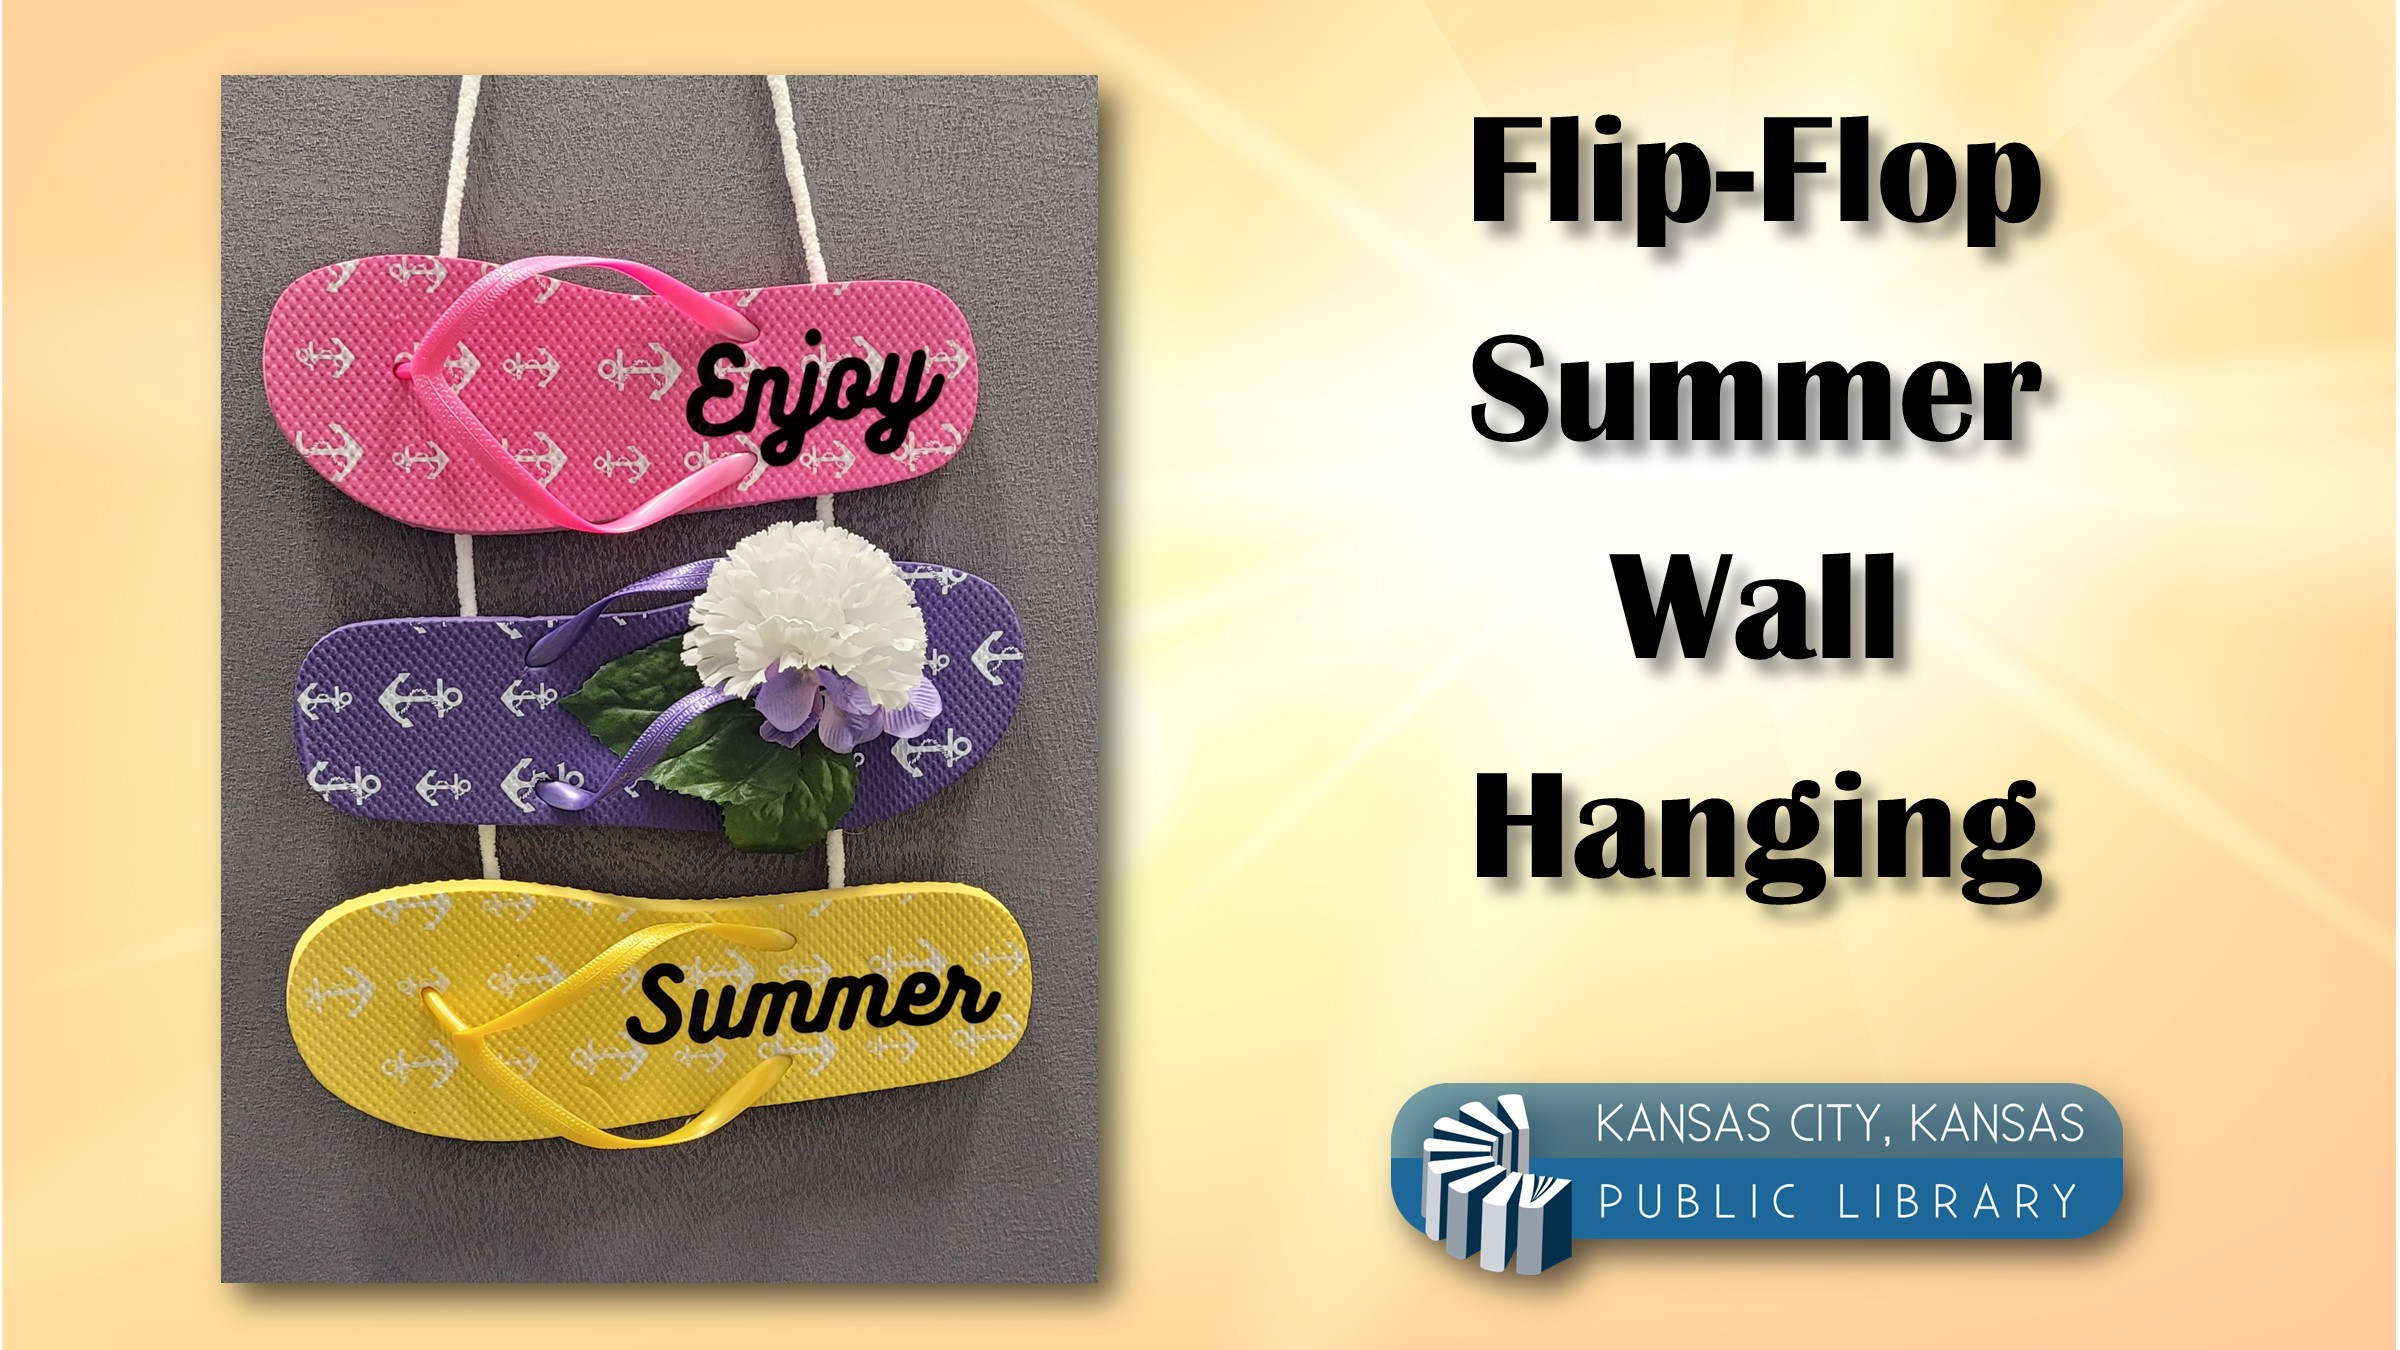 Flip flop wall decoration with the library logo on a yellow background